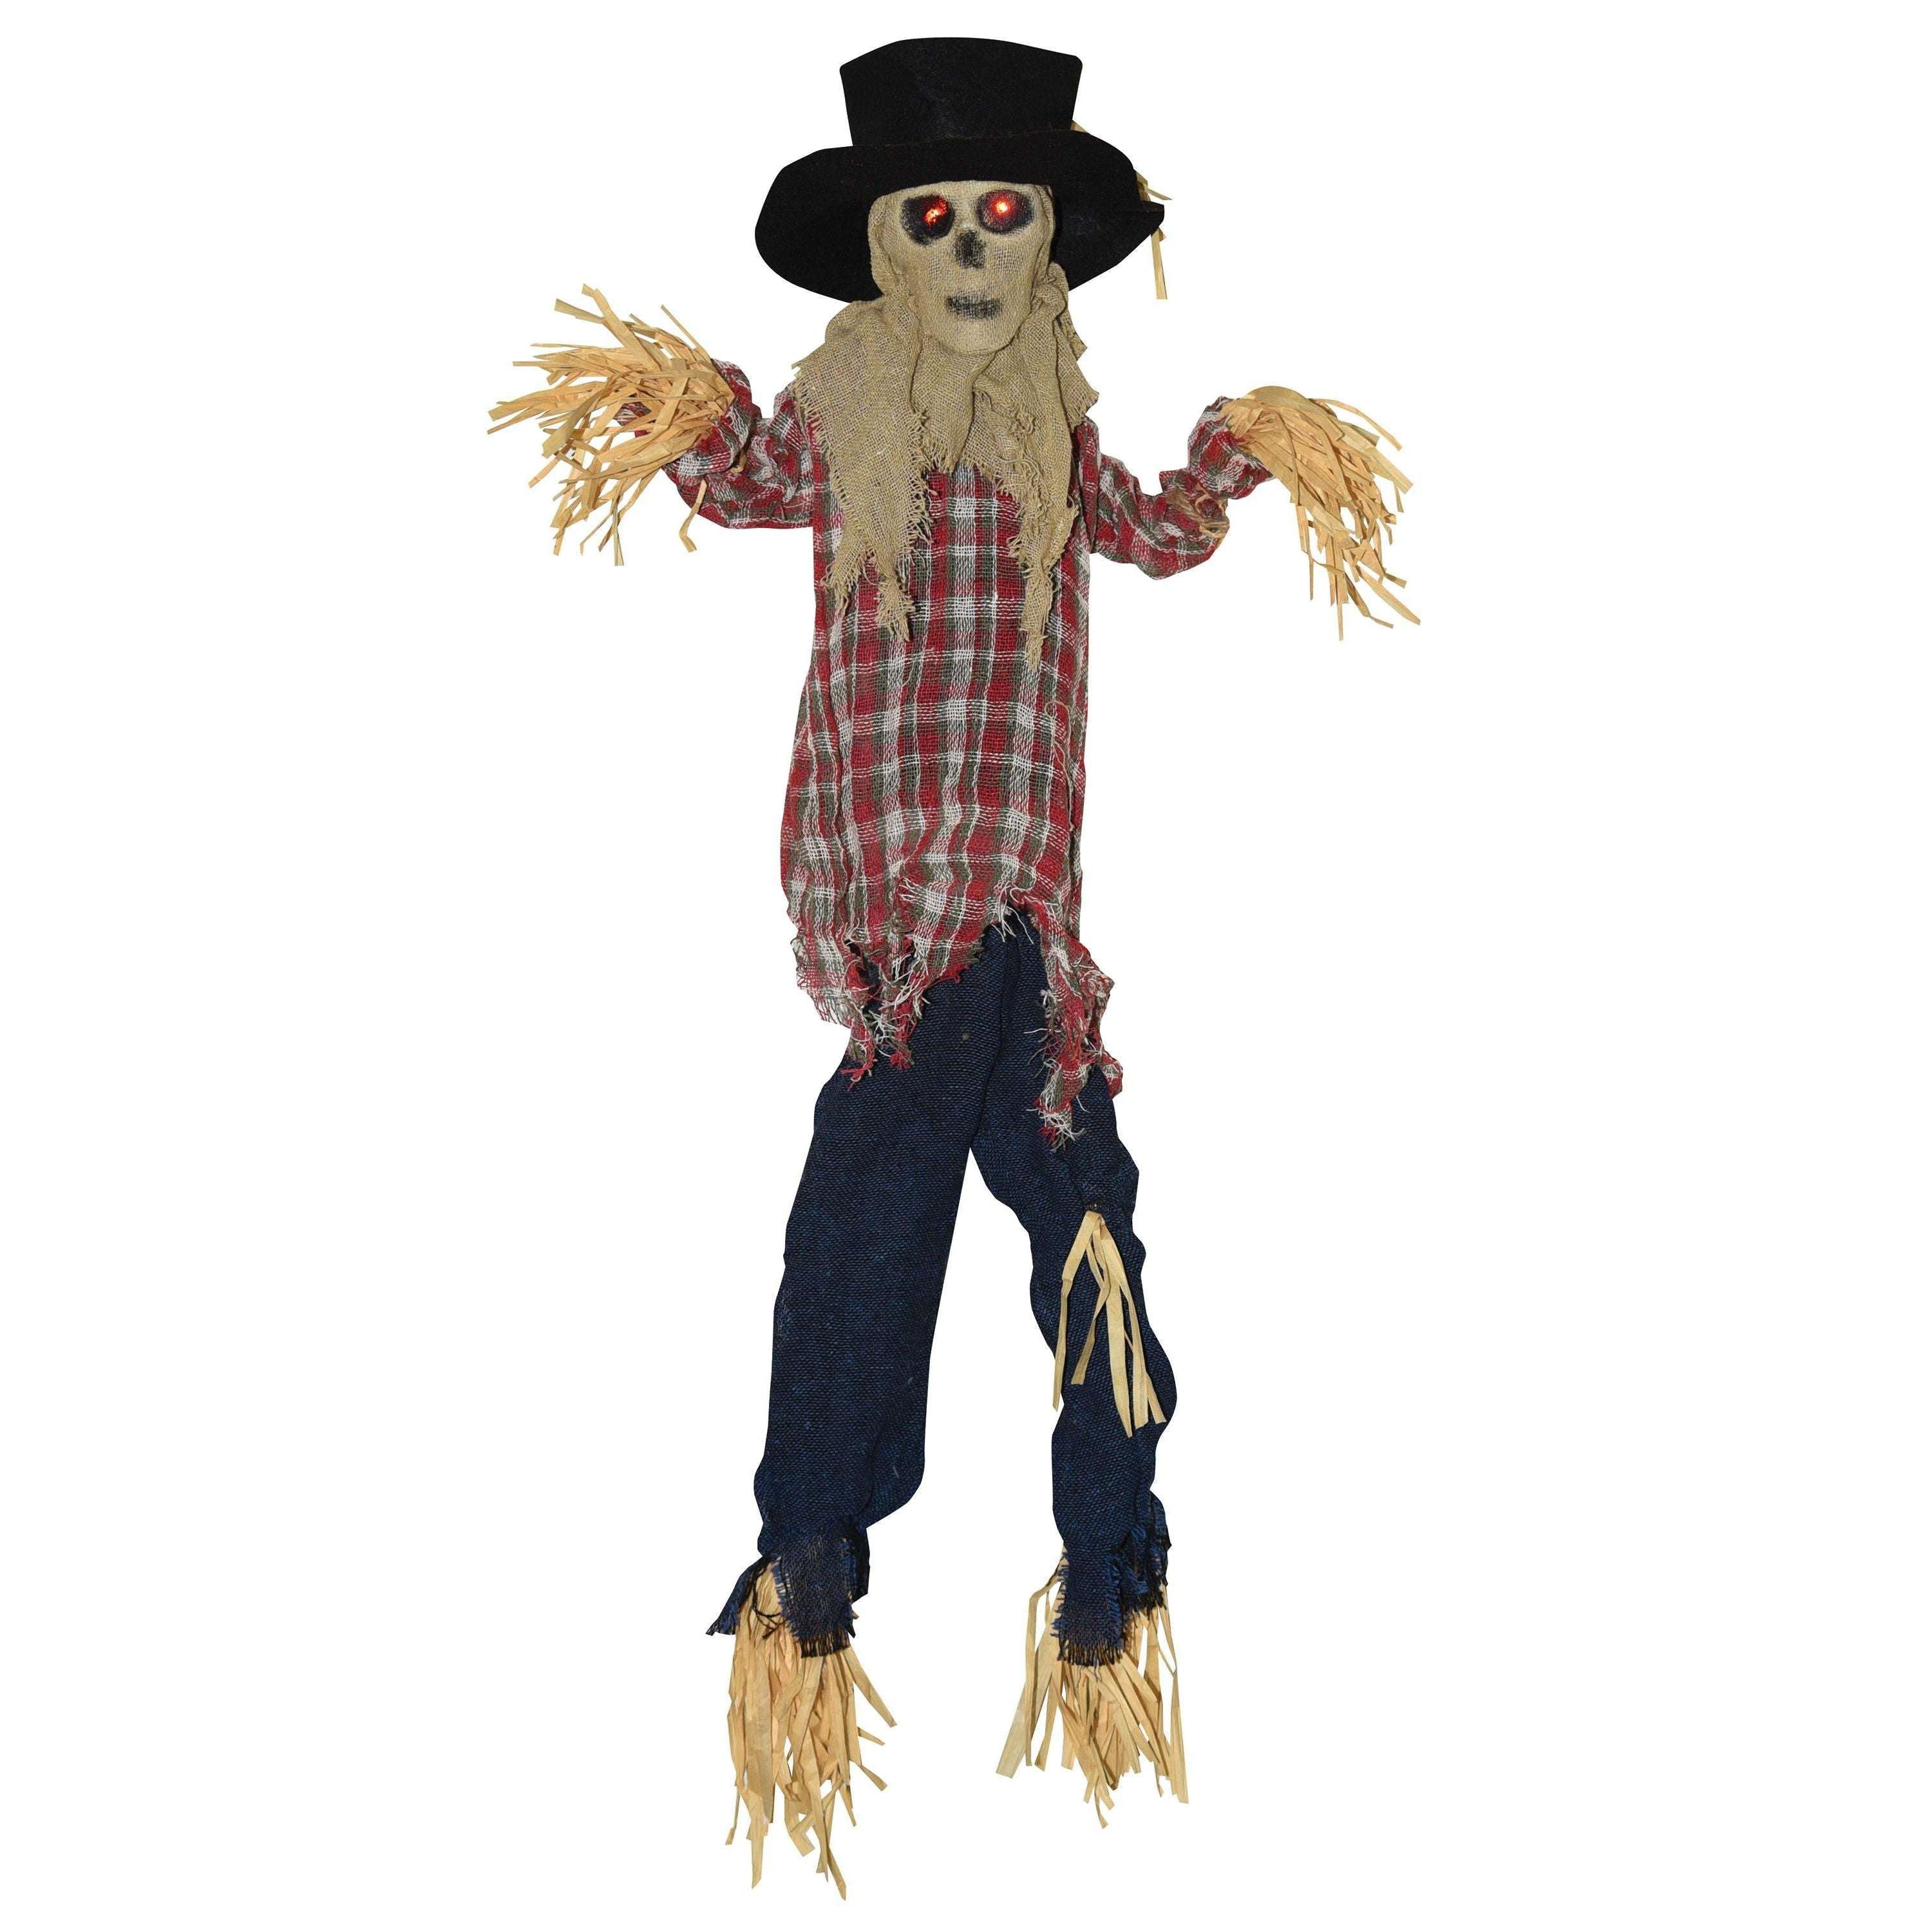 Sound Activated Kicking Scarecrow Prop Decoration